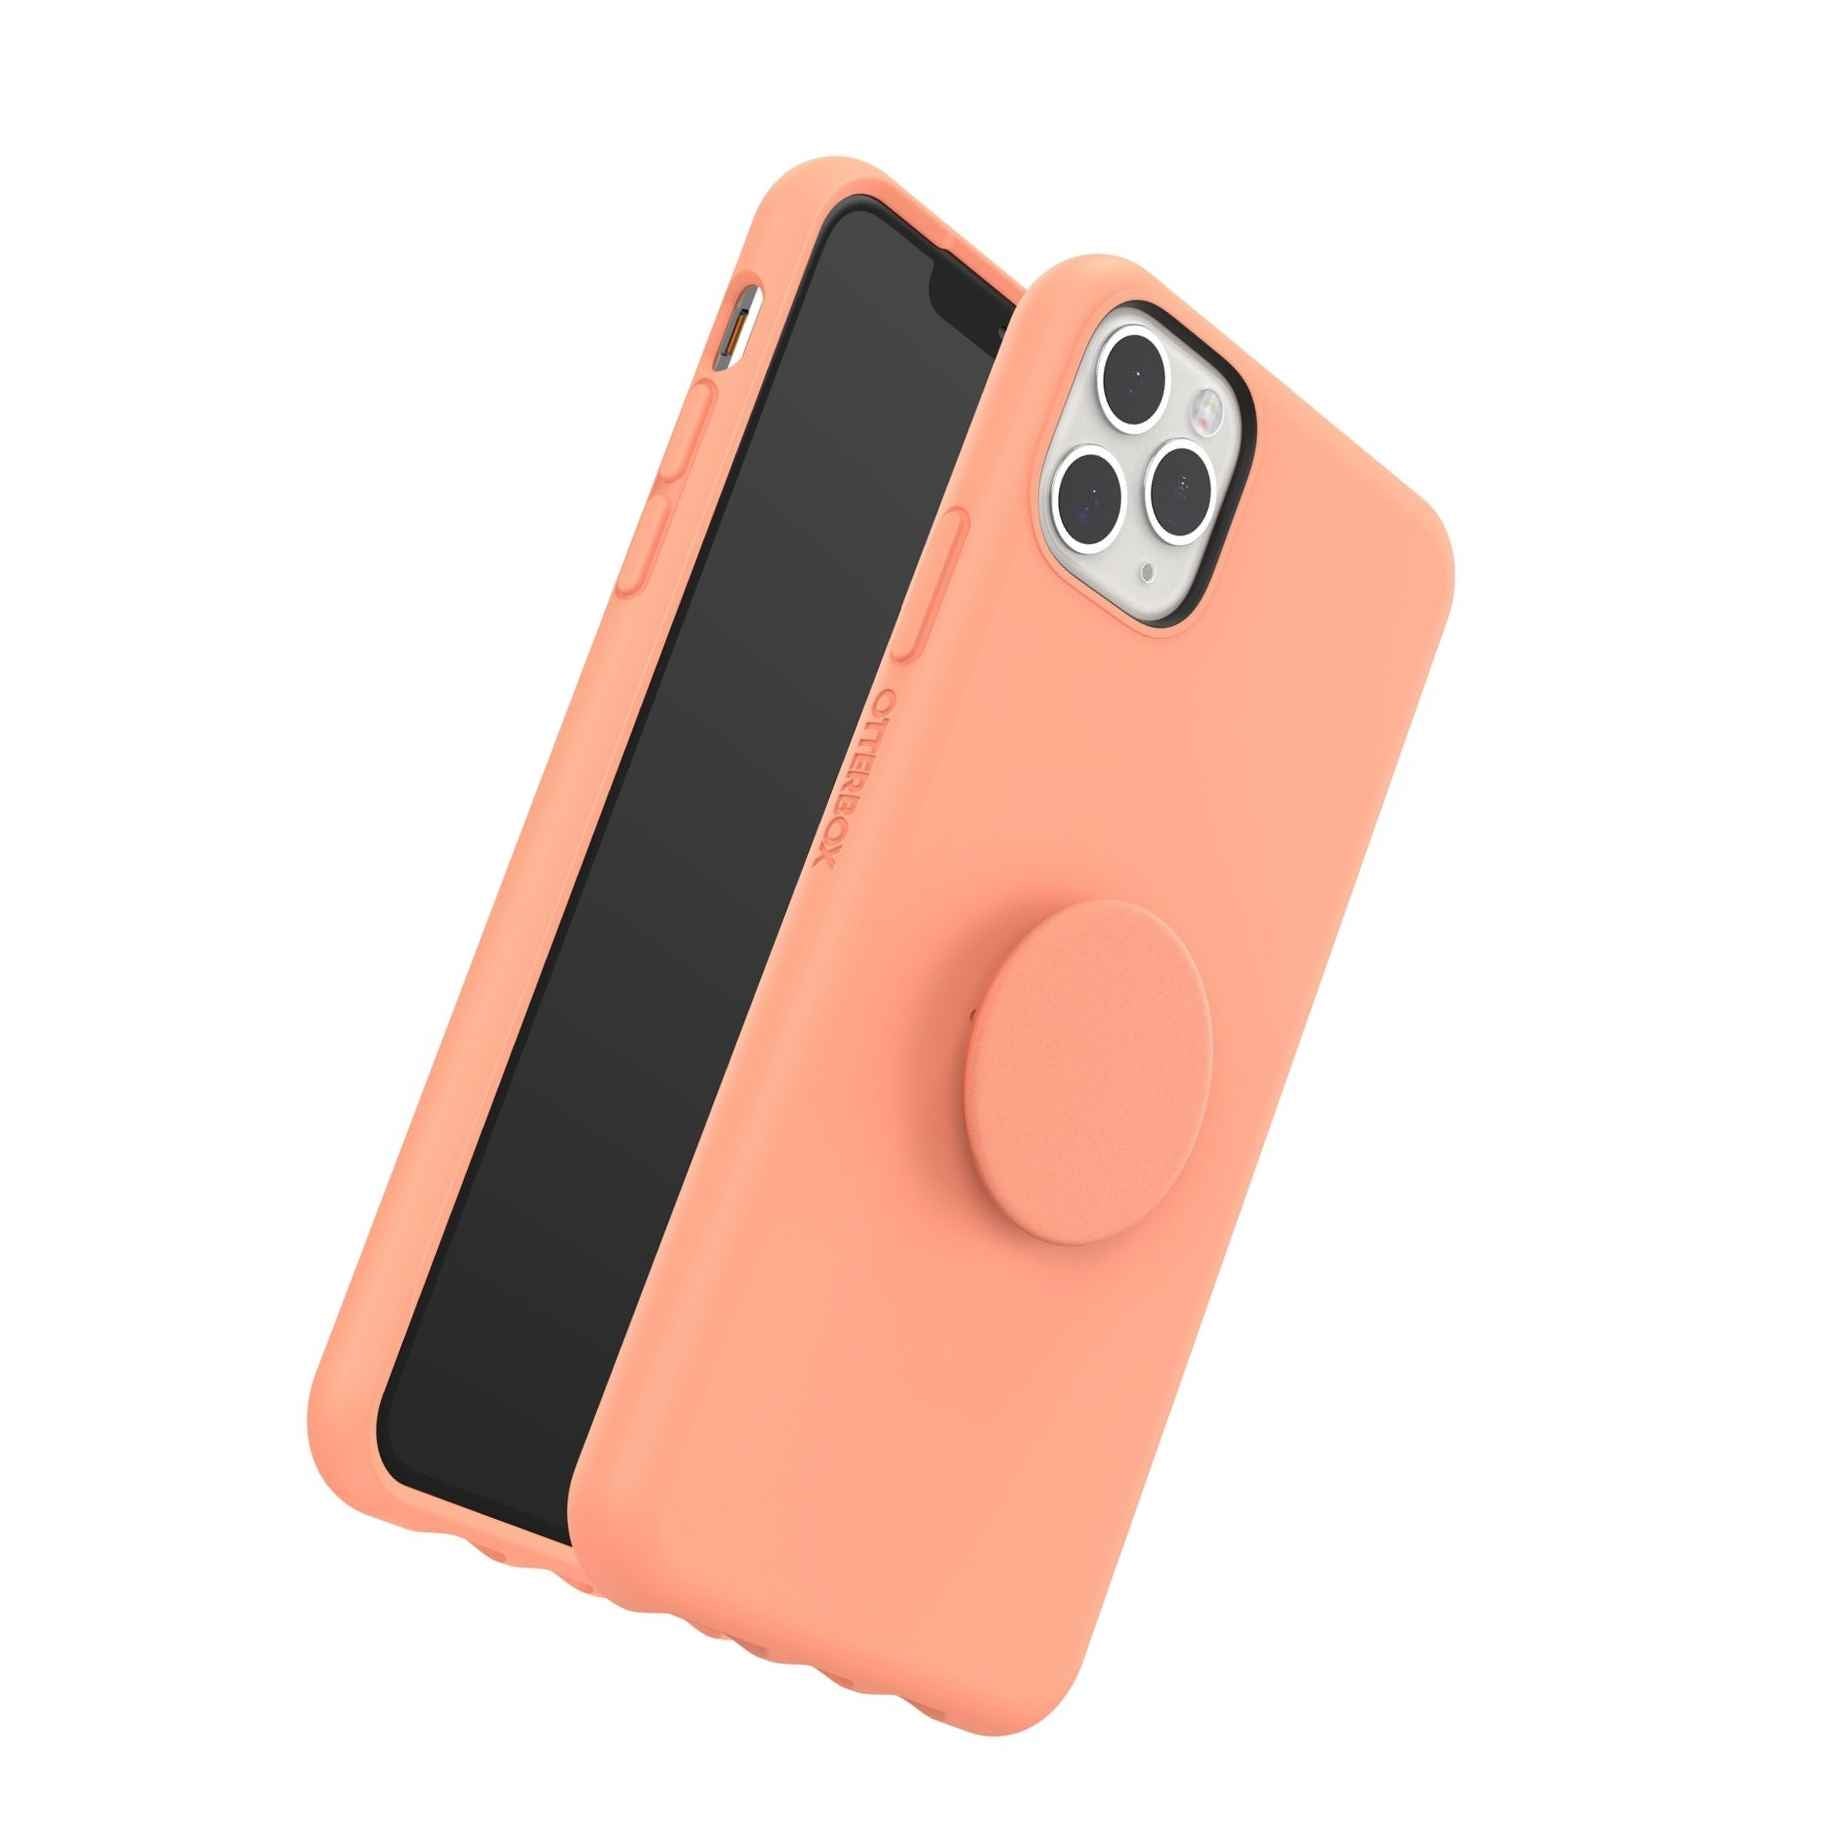 OtterBox + POP Ultra Slim Soft Touch Case for iPhone 11 Pro Max - Melon Twist